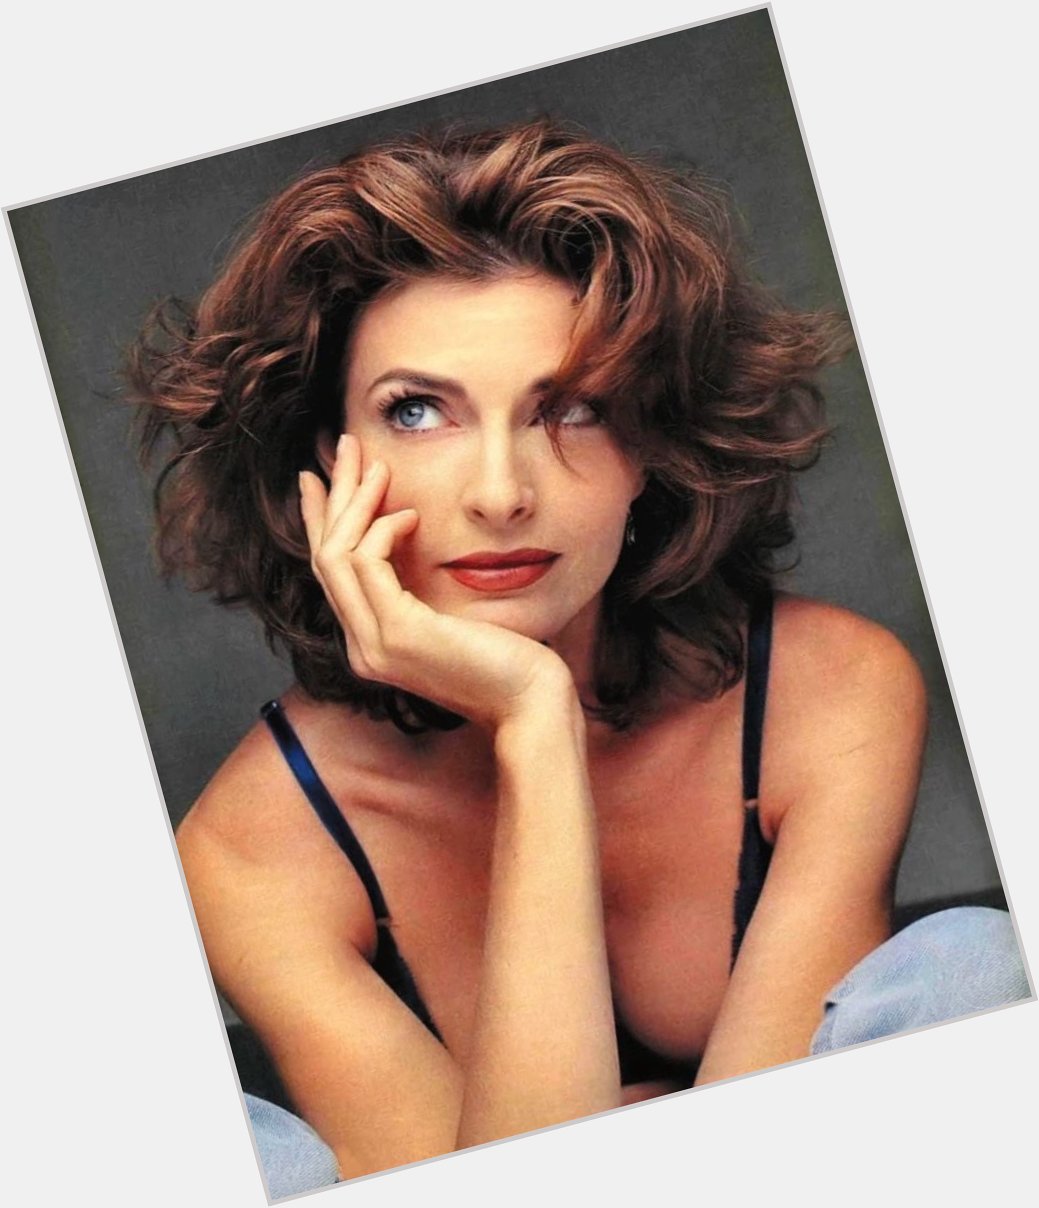 Happy Birthday to Model and Actress Joan Severance who turns 61 today! 